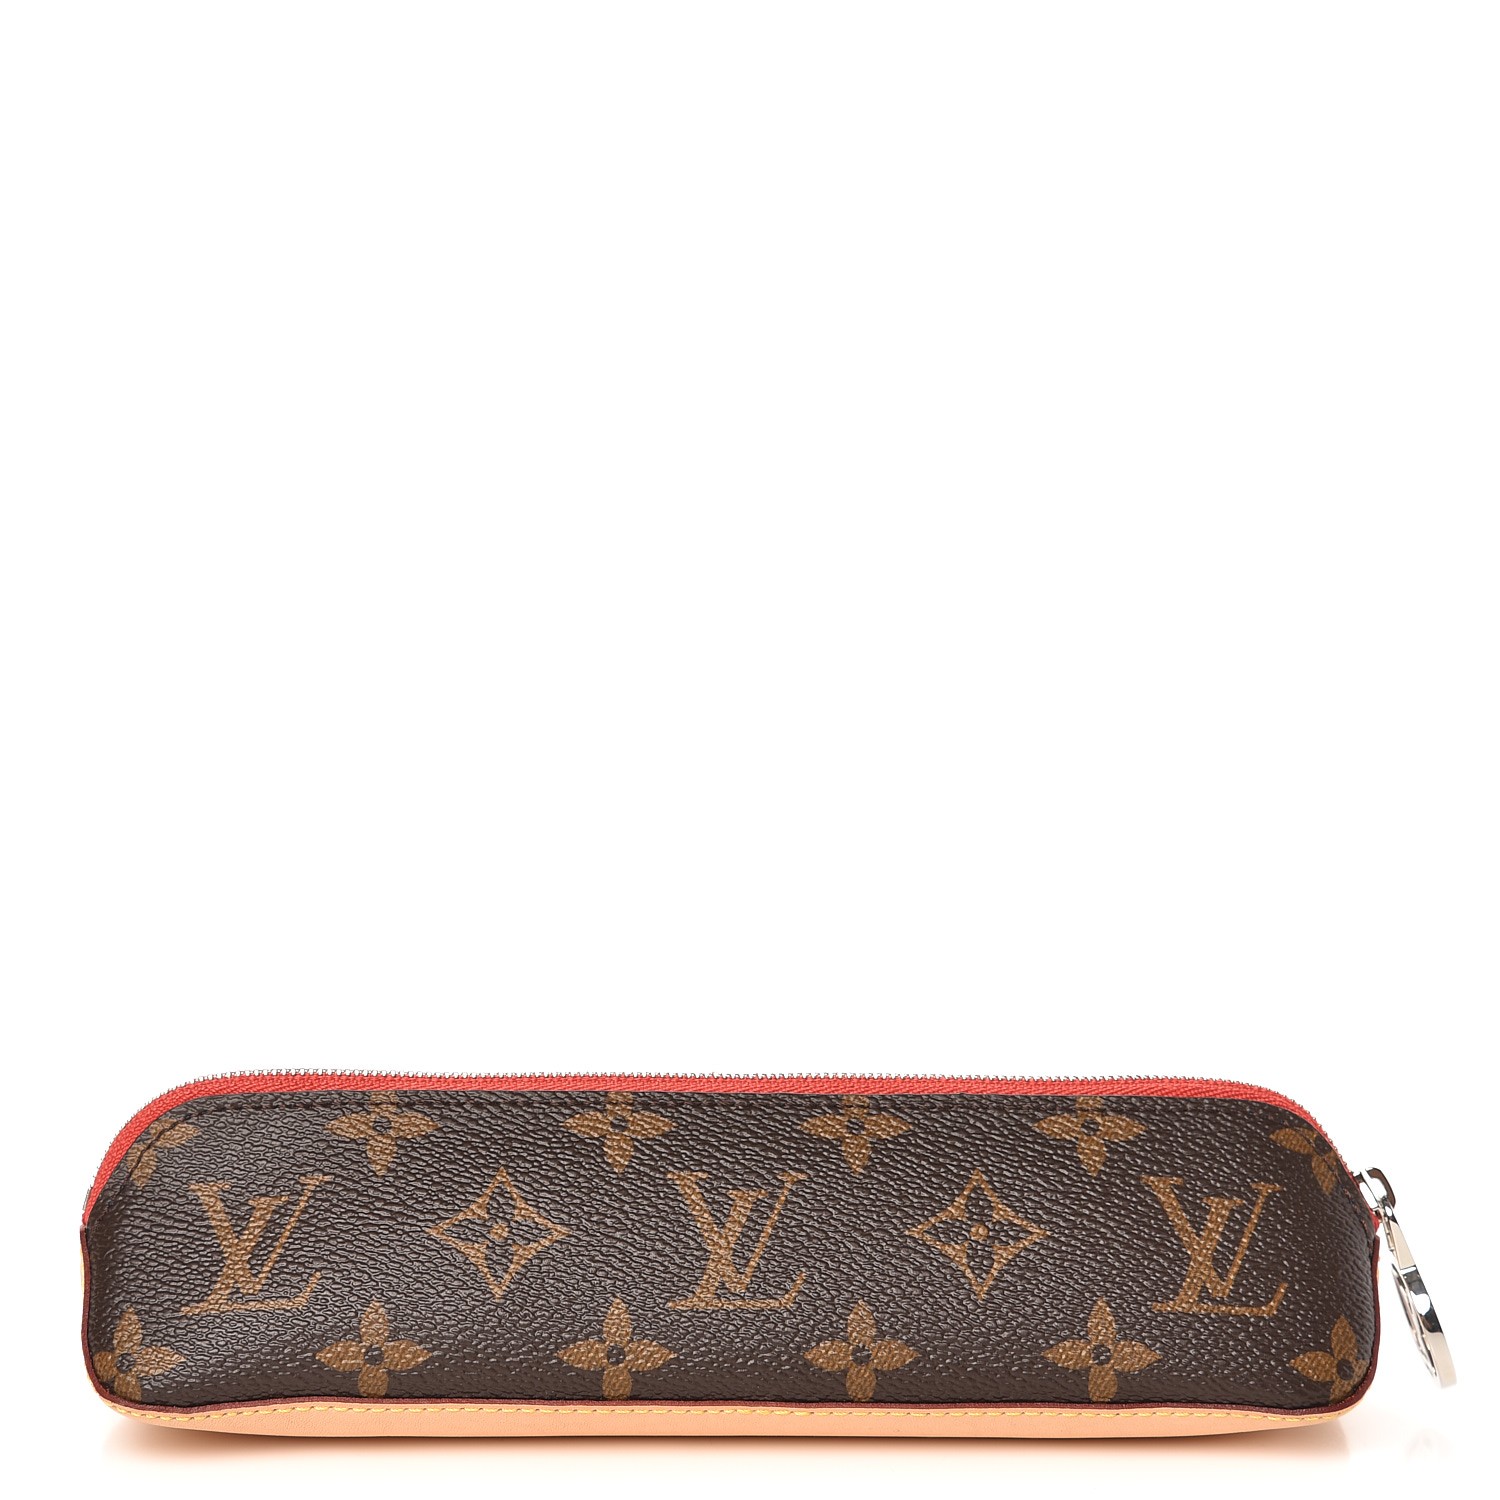 View 1 - Other leathers Personalization HOTSTAMPING Pencil Pouch Elizabeth, Louis Vuitton ®